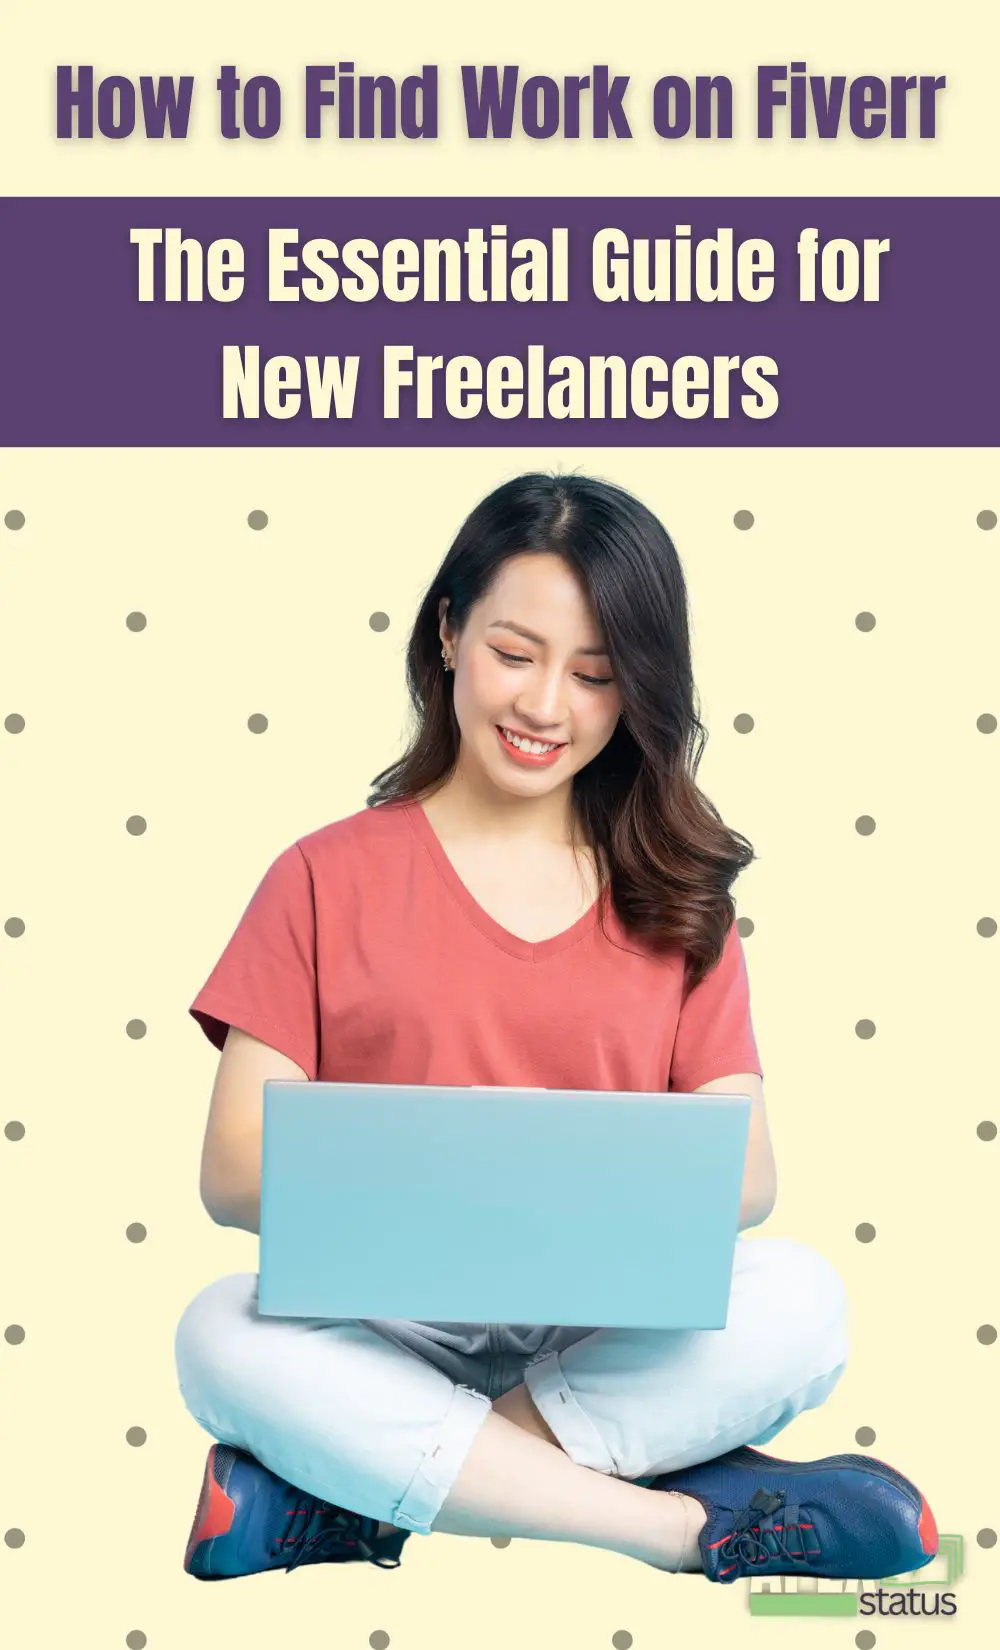 How to Find Work on Fiverr: The Essential Guide for New Freelancers